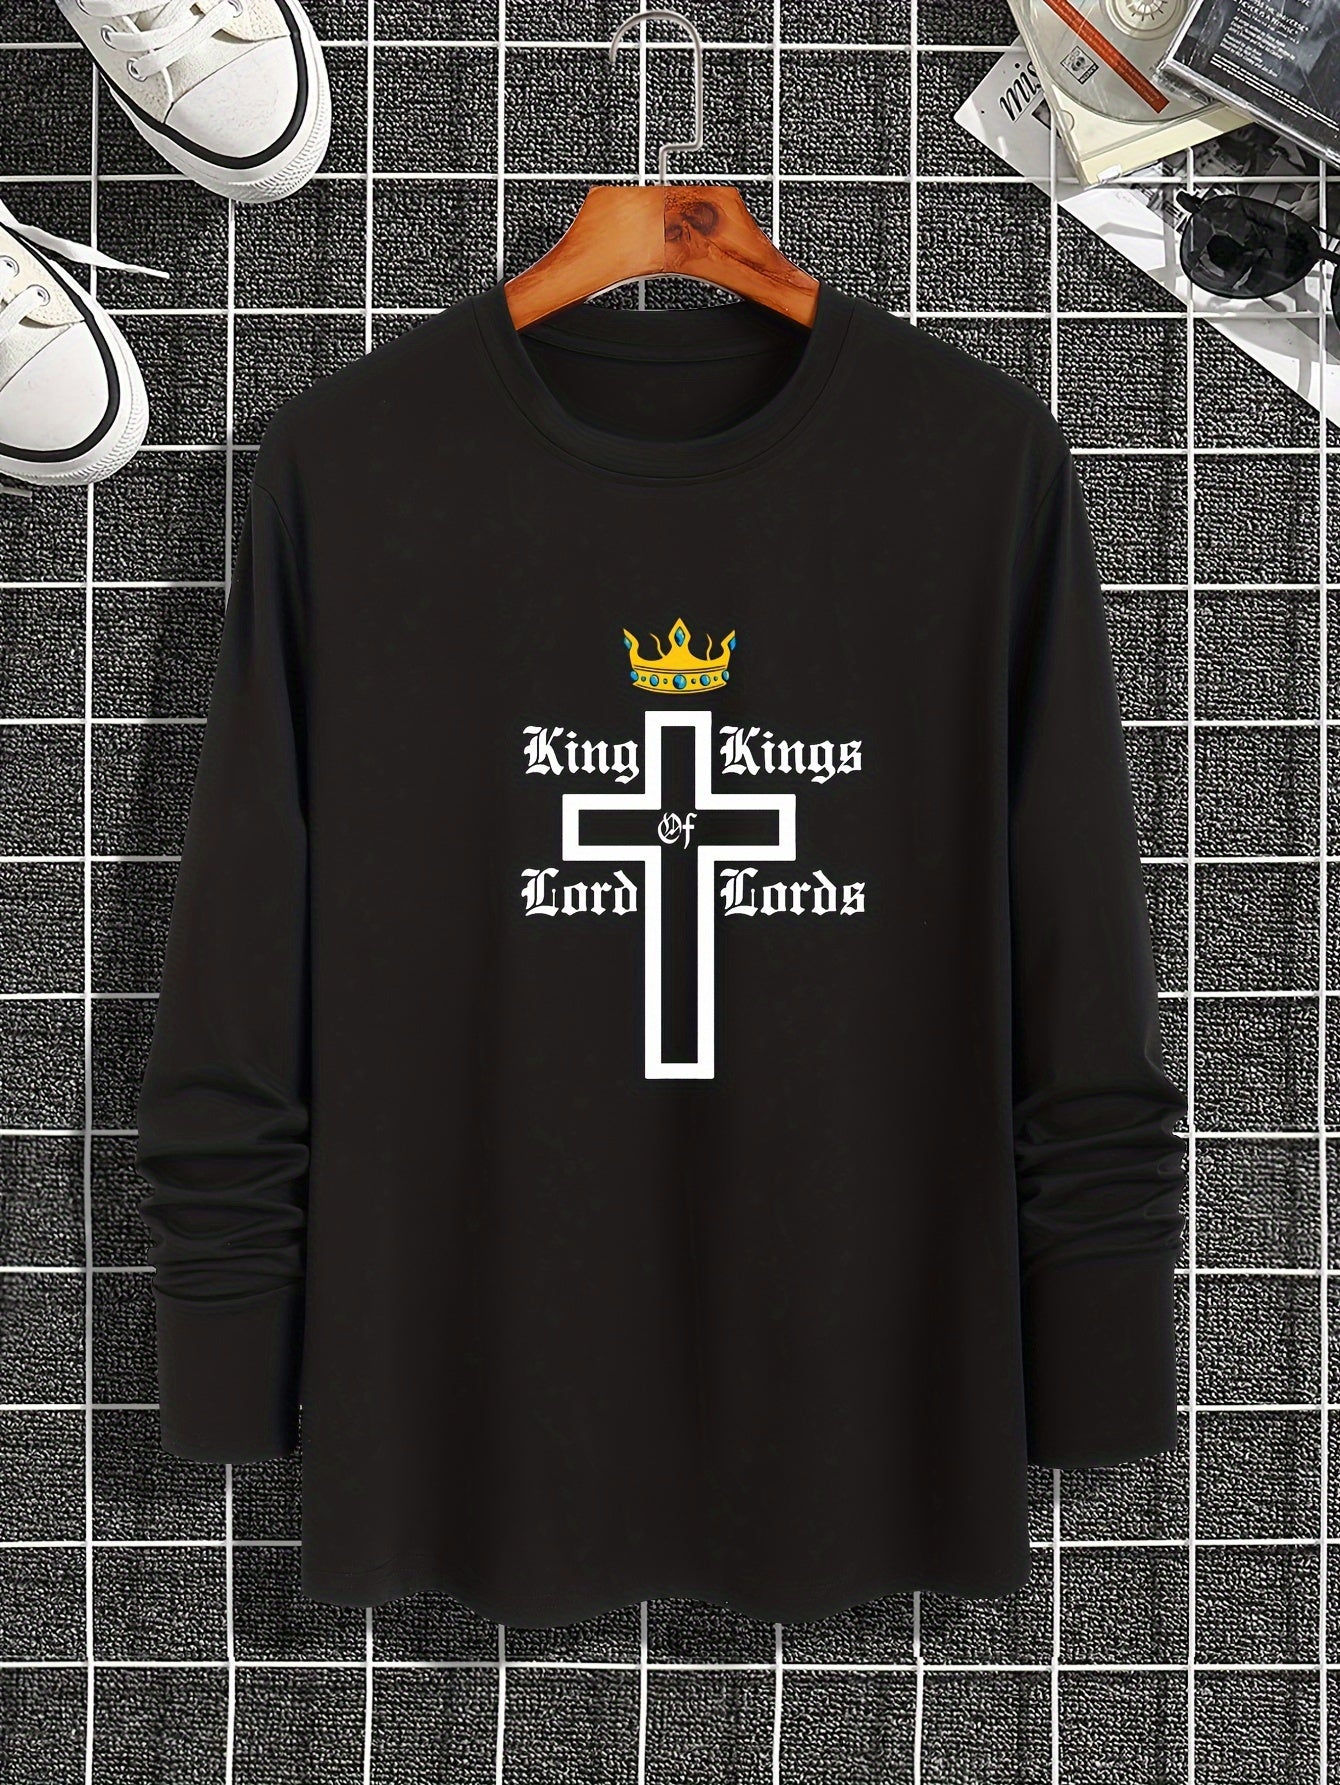 King Of Kings Lord Of Lords Men's Christian Pullover Sweatshirt claimedbygoddesigns